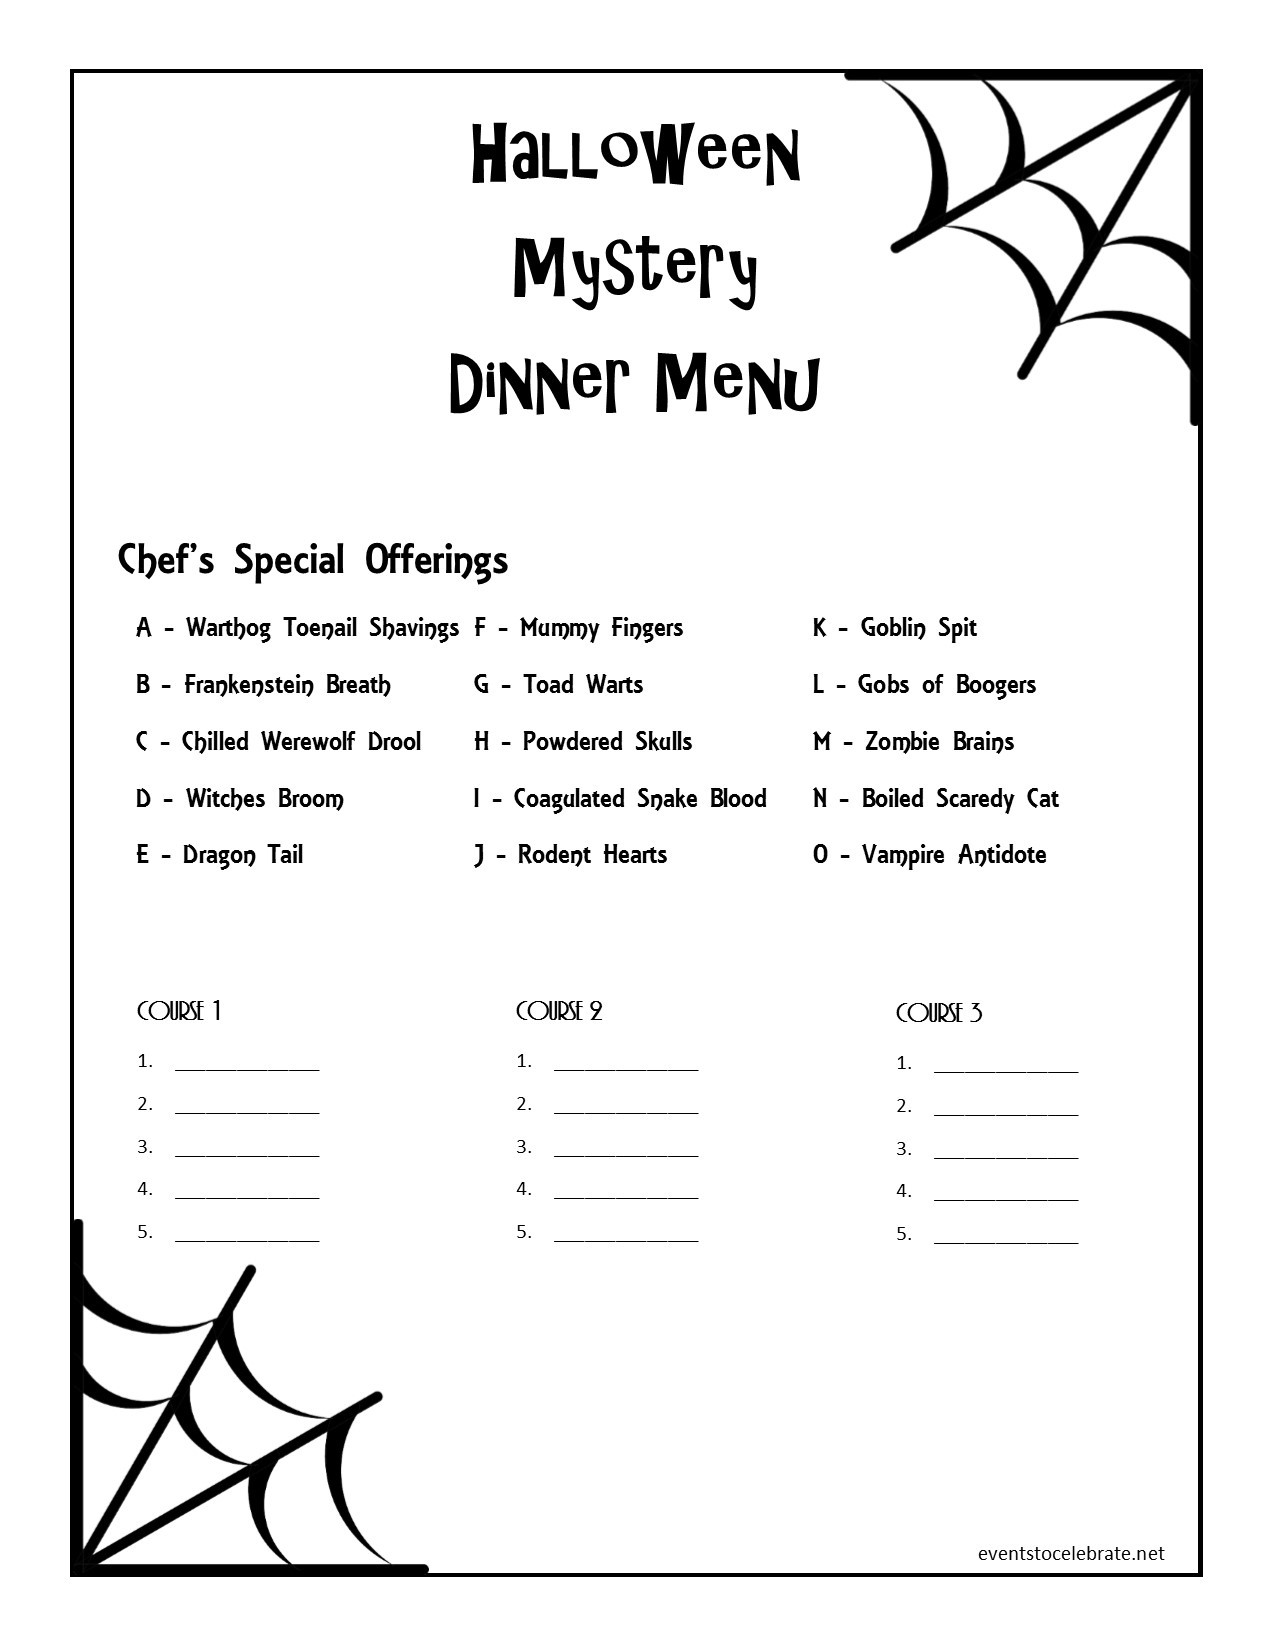 Mystery Dinner Party Ideas
 Halloween Mystery Dinner Menu events to CELEBRATE